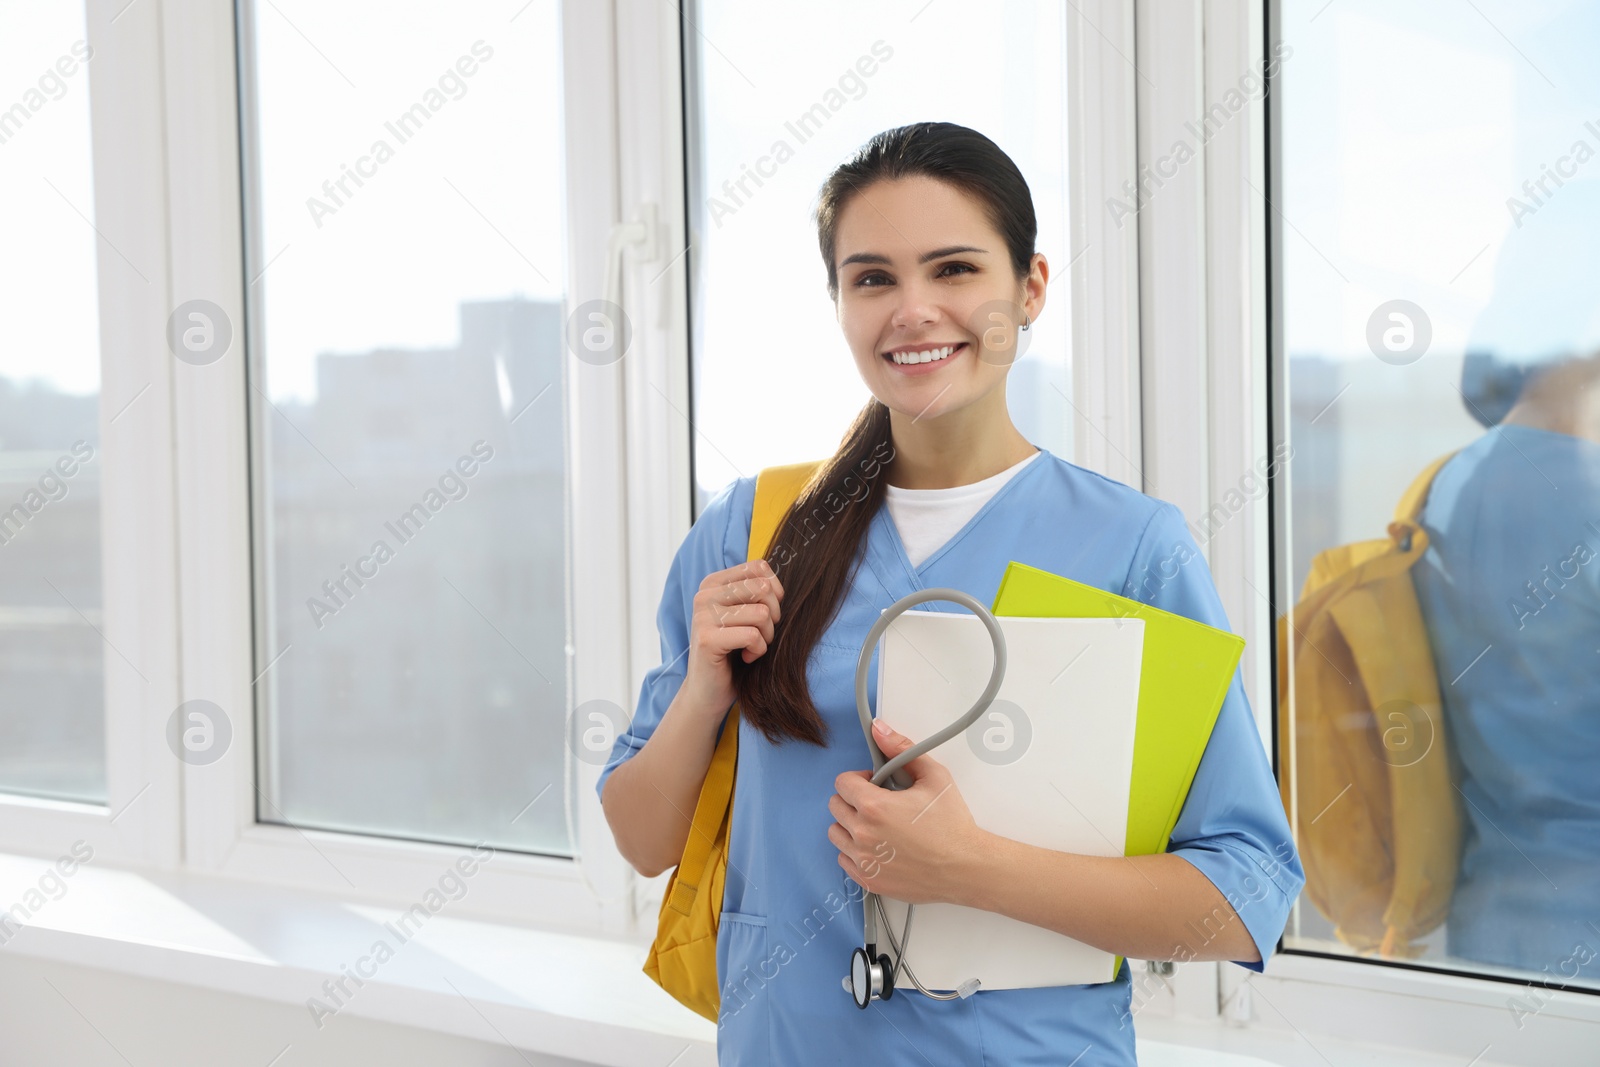 Photo of Smart medical student with stethoscope and folders in college hallway, space for text